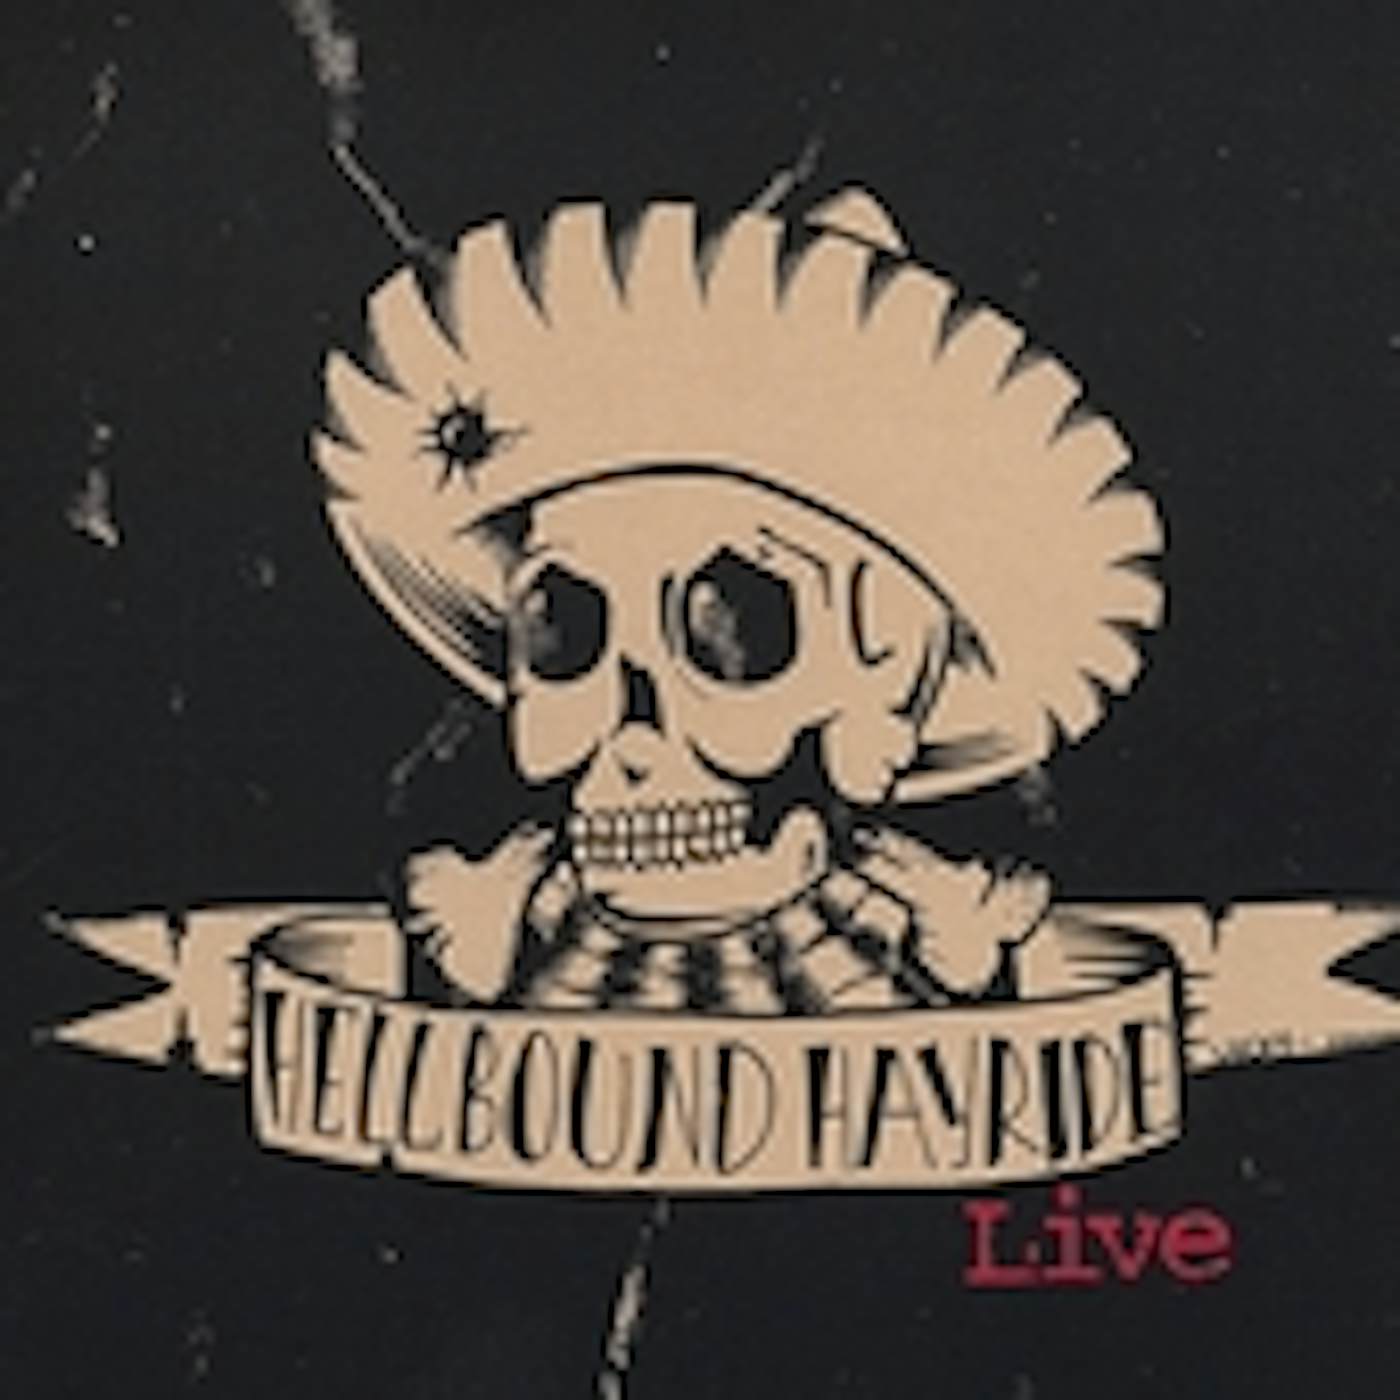 Hellbound Hayride LIVE WHO SHOT A HOLE IN MY SOMBRERO CD